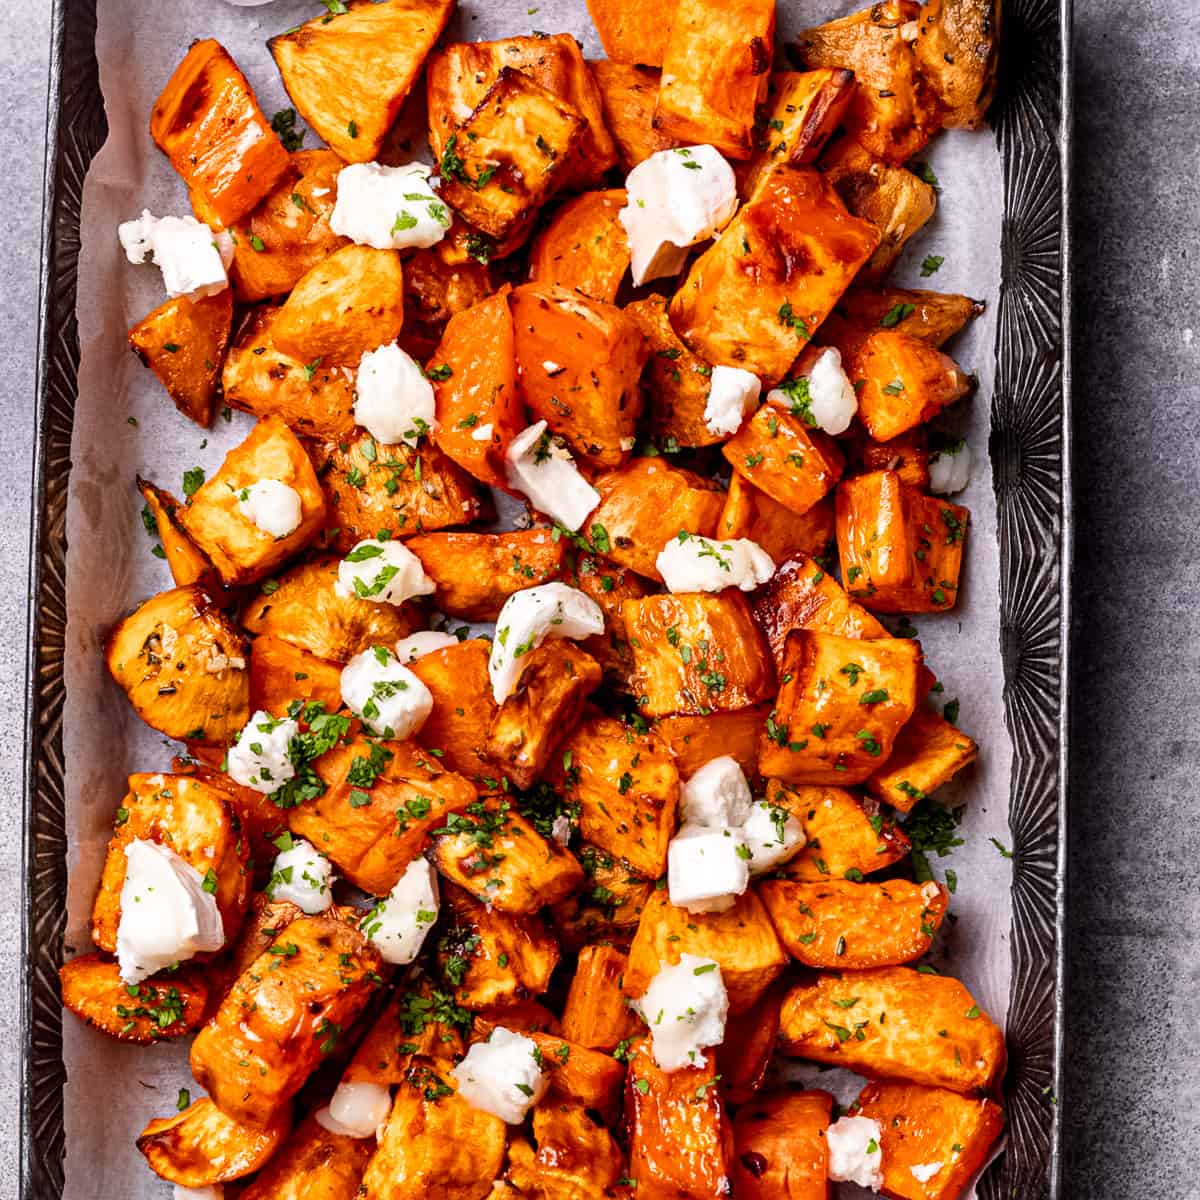 Crispy roasted sweet potatoes with goat's cheese.